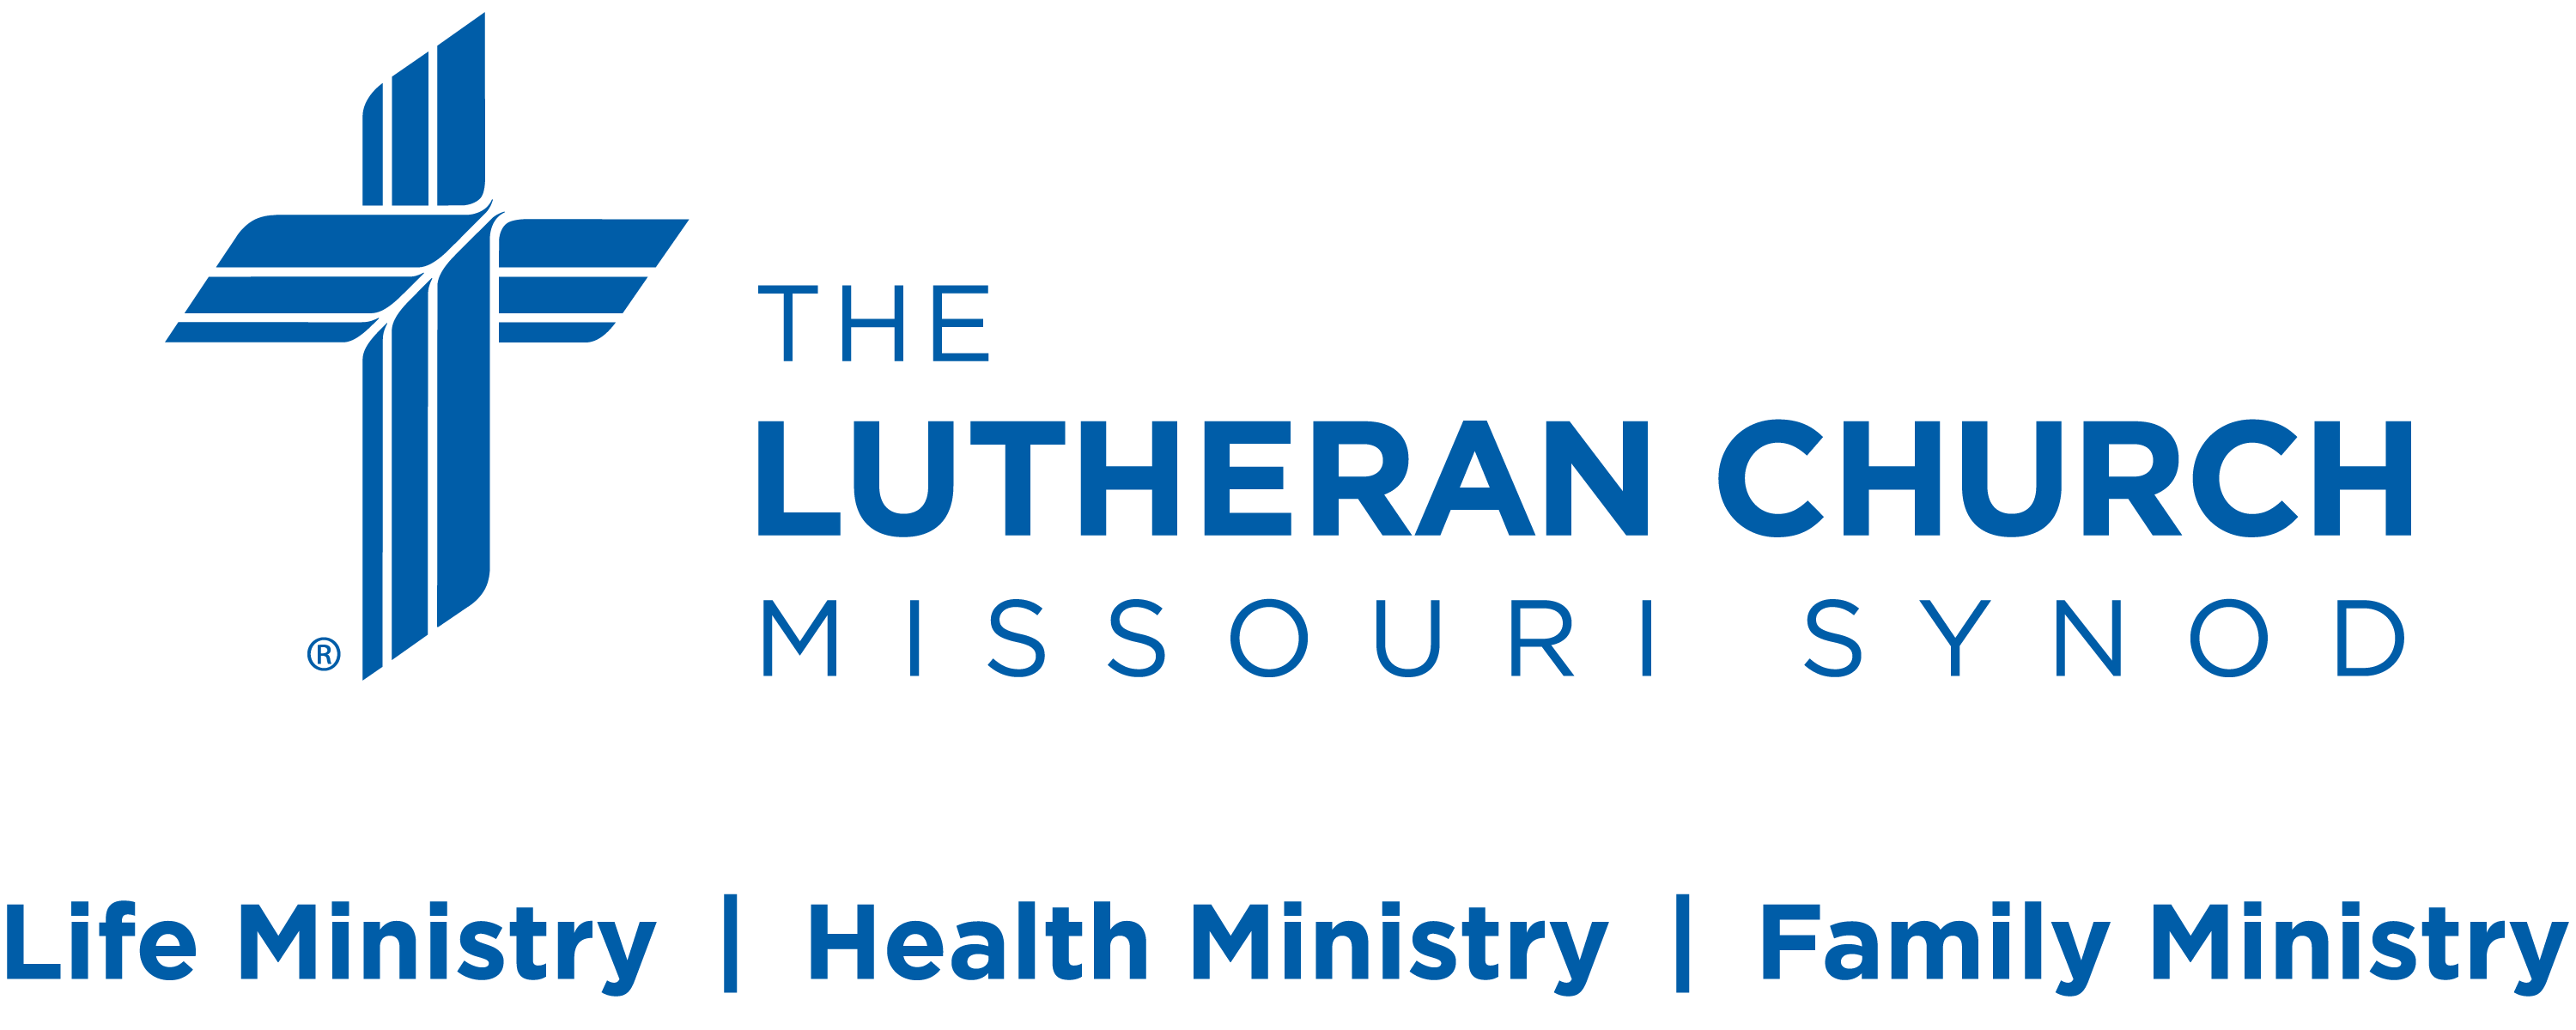 LCMS - Life Ministry,  Health Ministry, Family Ministry